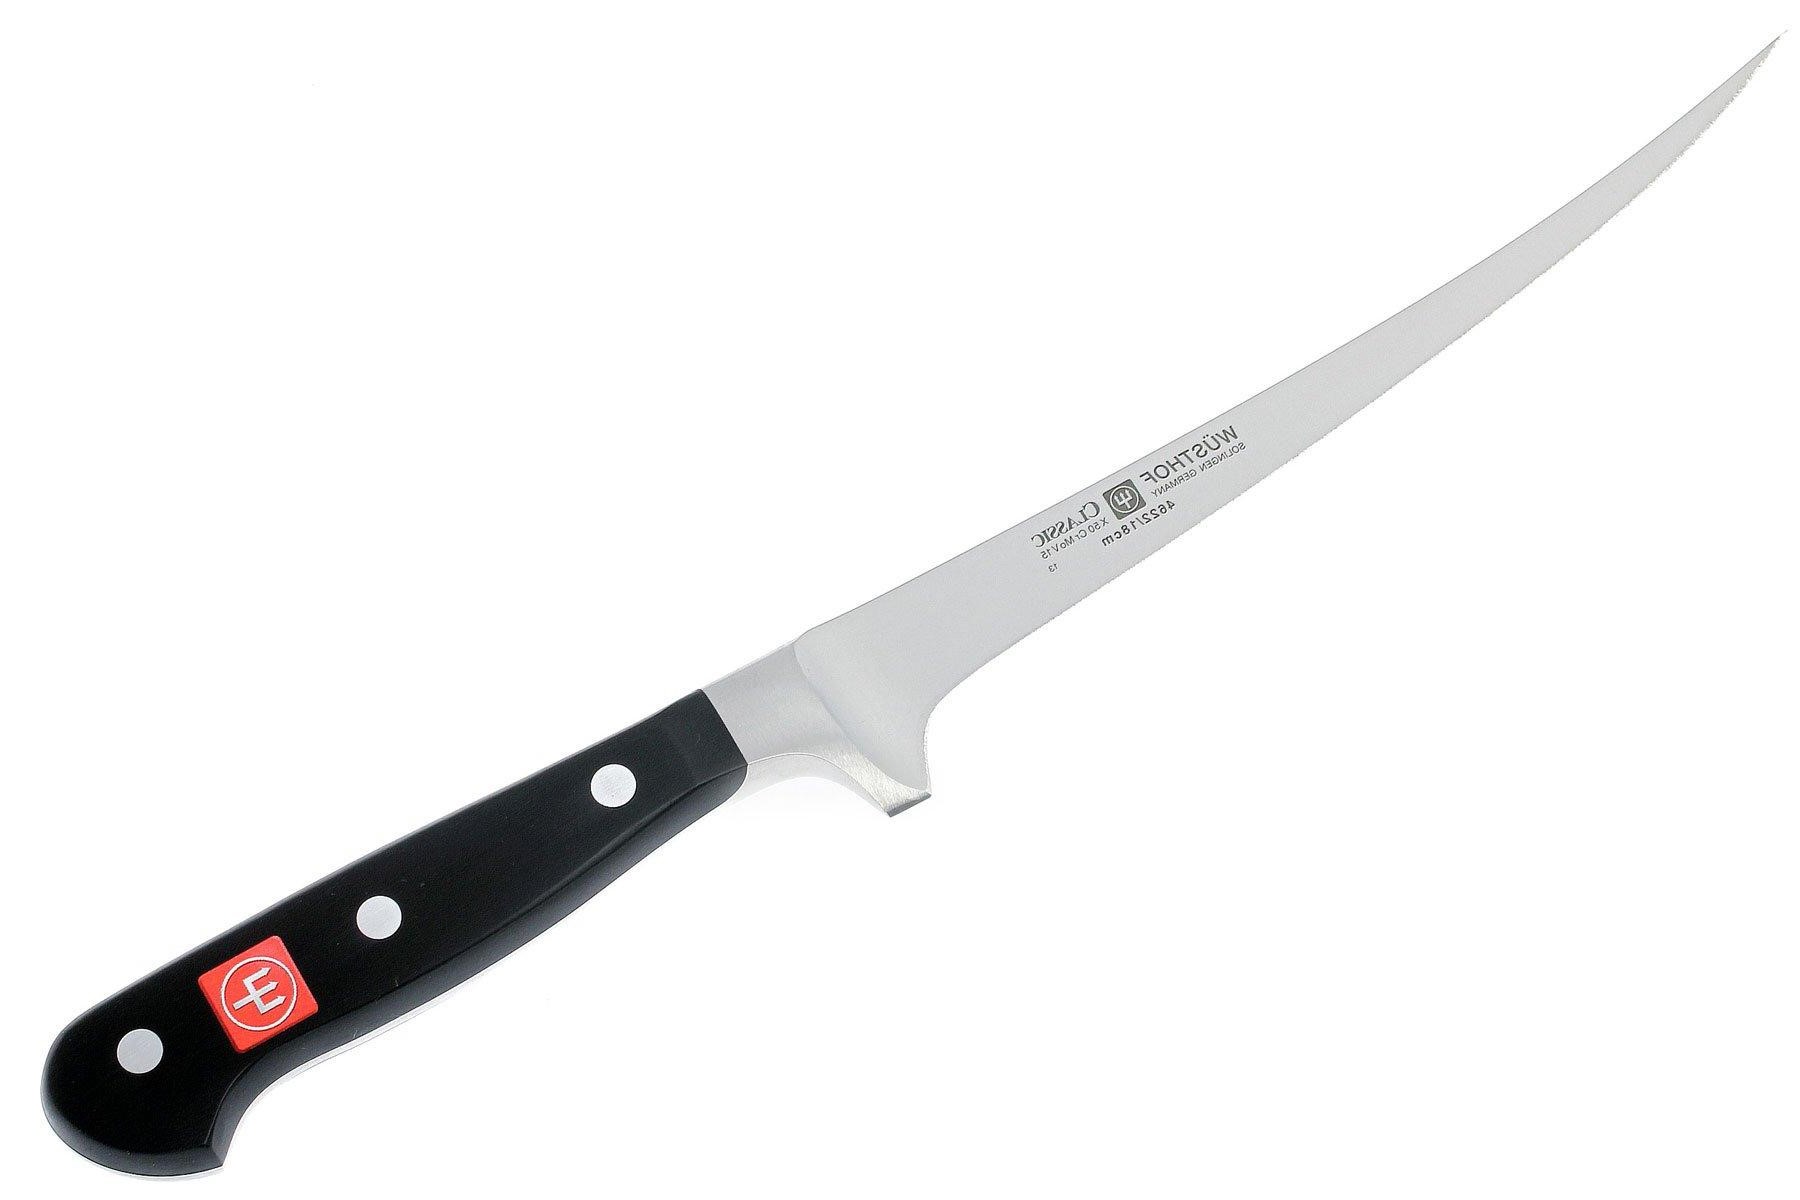 Top Fish Fillet Knife Review: A Must-Have for Every Angler